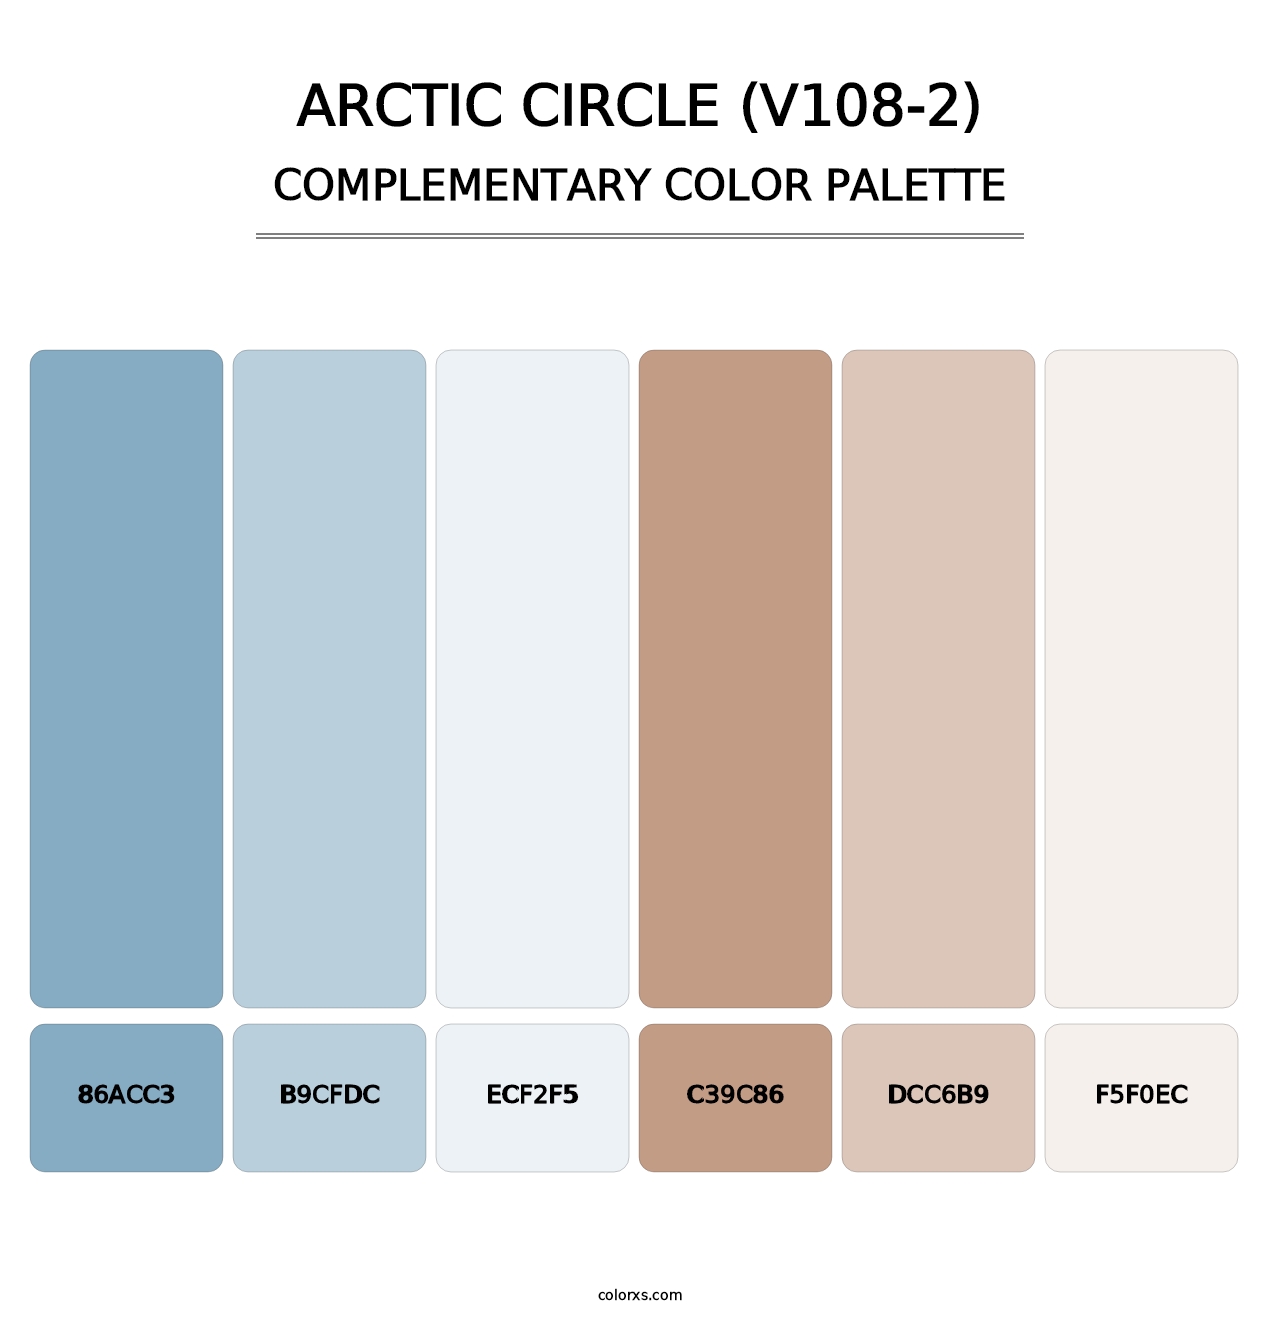 Arctic Circle (V108-2) - Complementary Color Palette